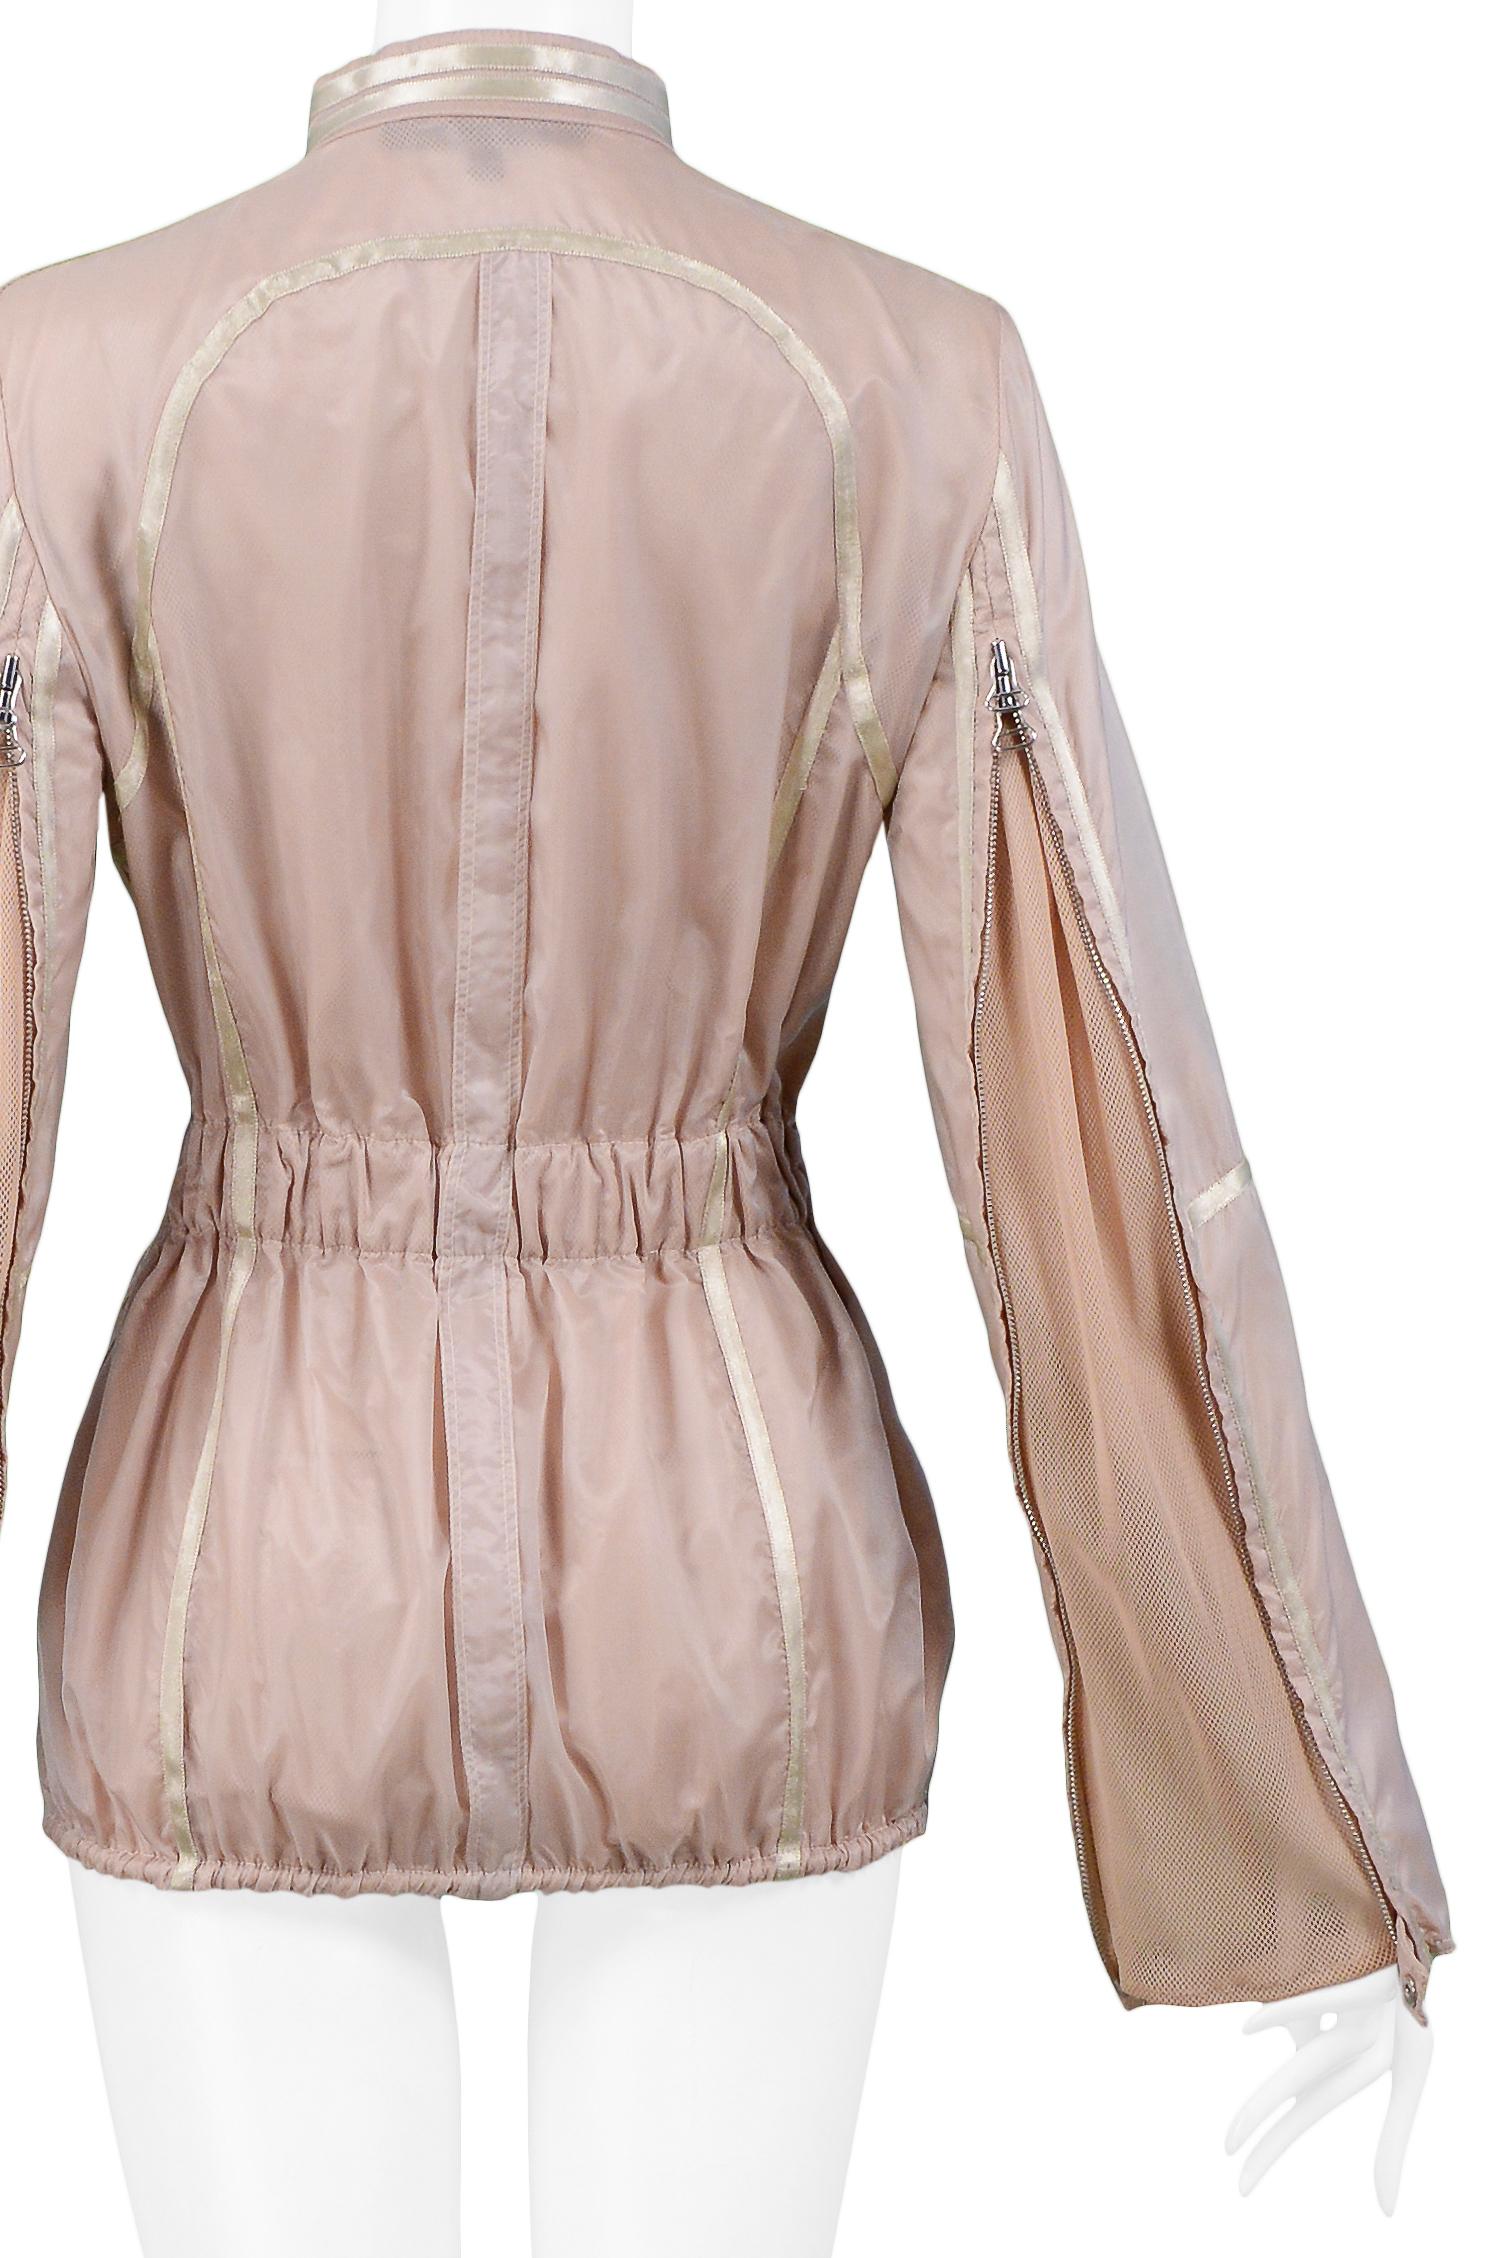 Gianfranco Ferre Pink Nylon Windbreaker Jacket 2005 In Excellent Condition For Sale In Los Angeles, CA